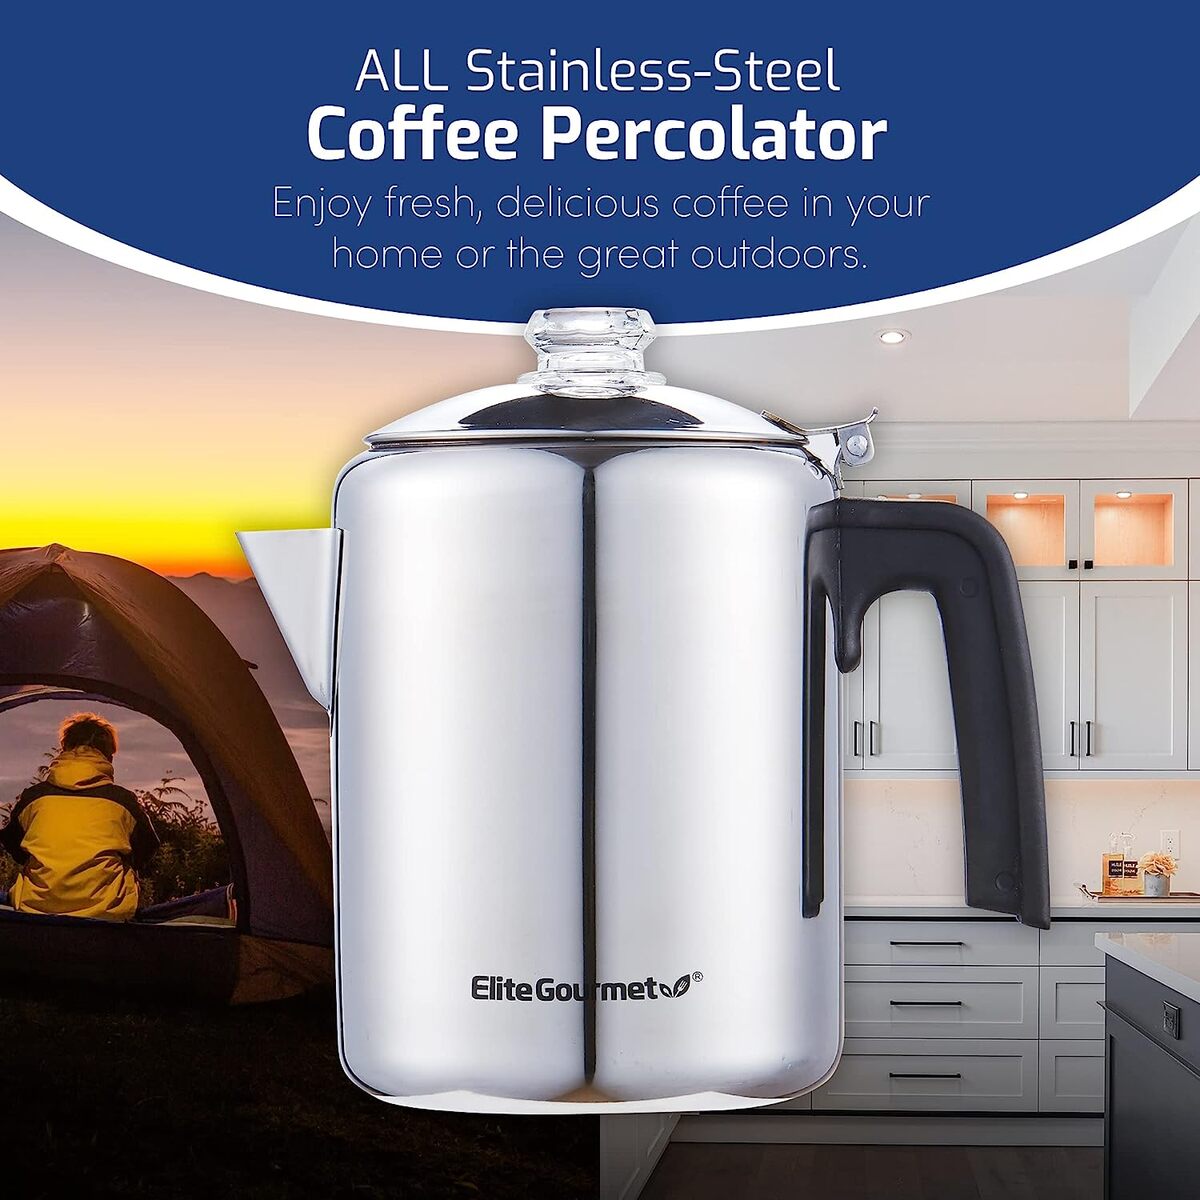 Elite Gourmet 8 Cup Non Electric Stainless Steel Percolator with Glass Knob